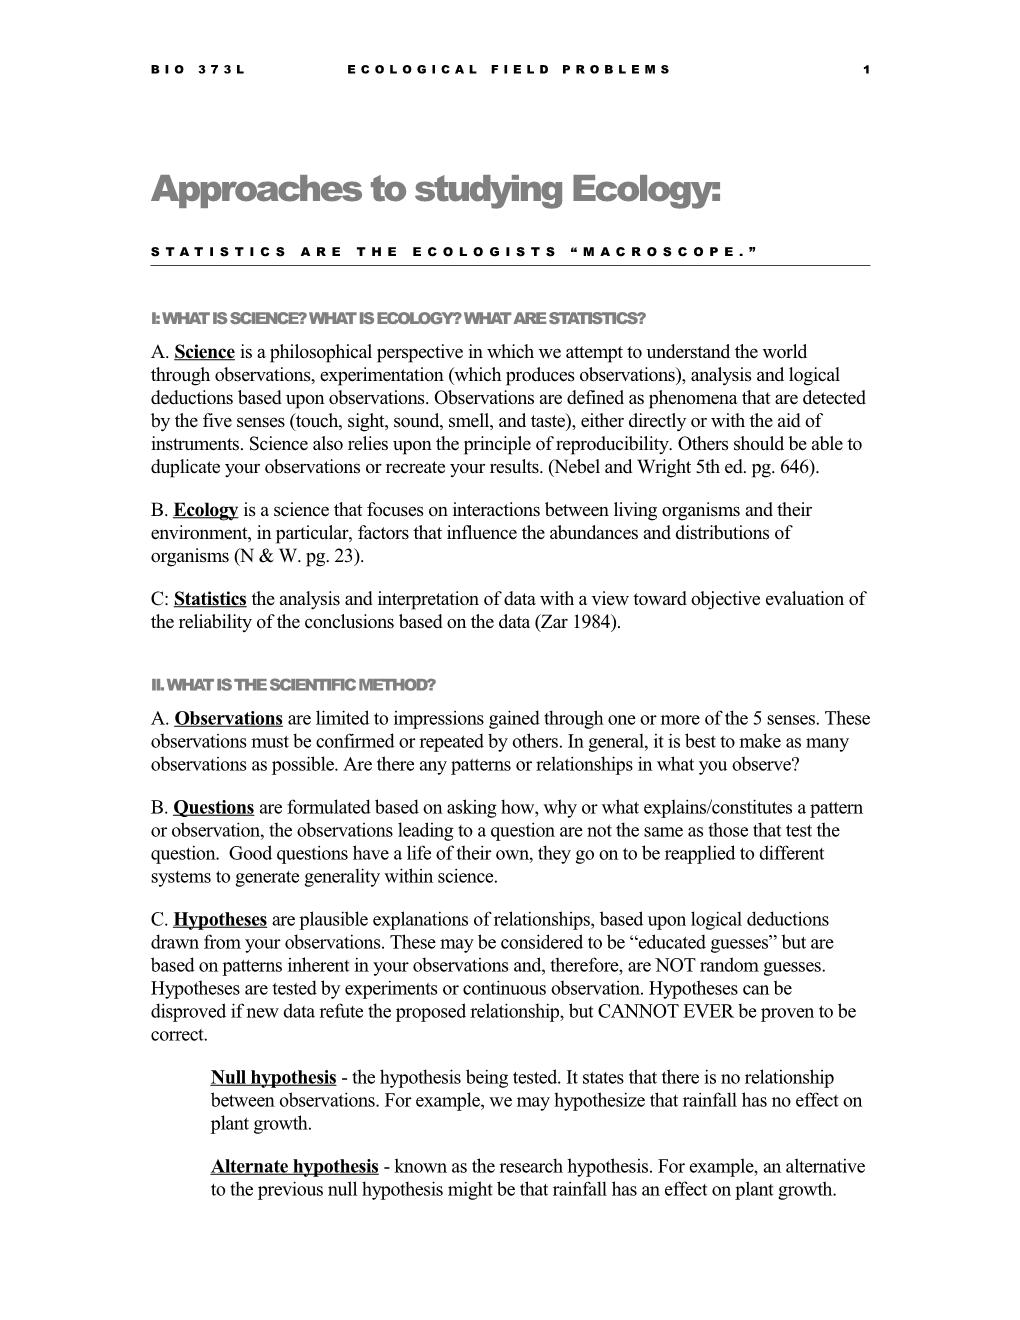 Approaches To Studying Ecology: